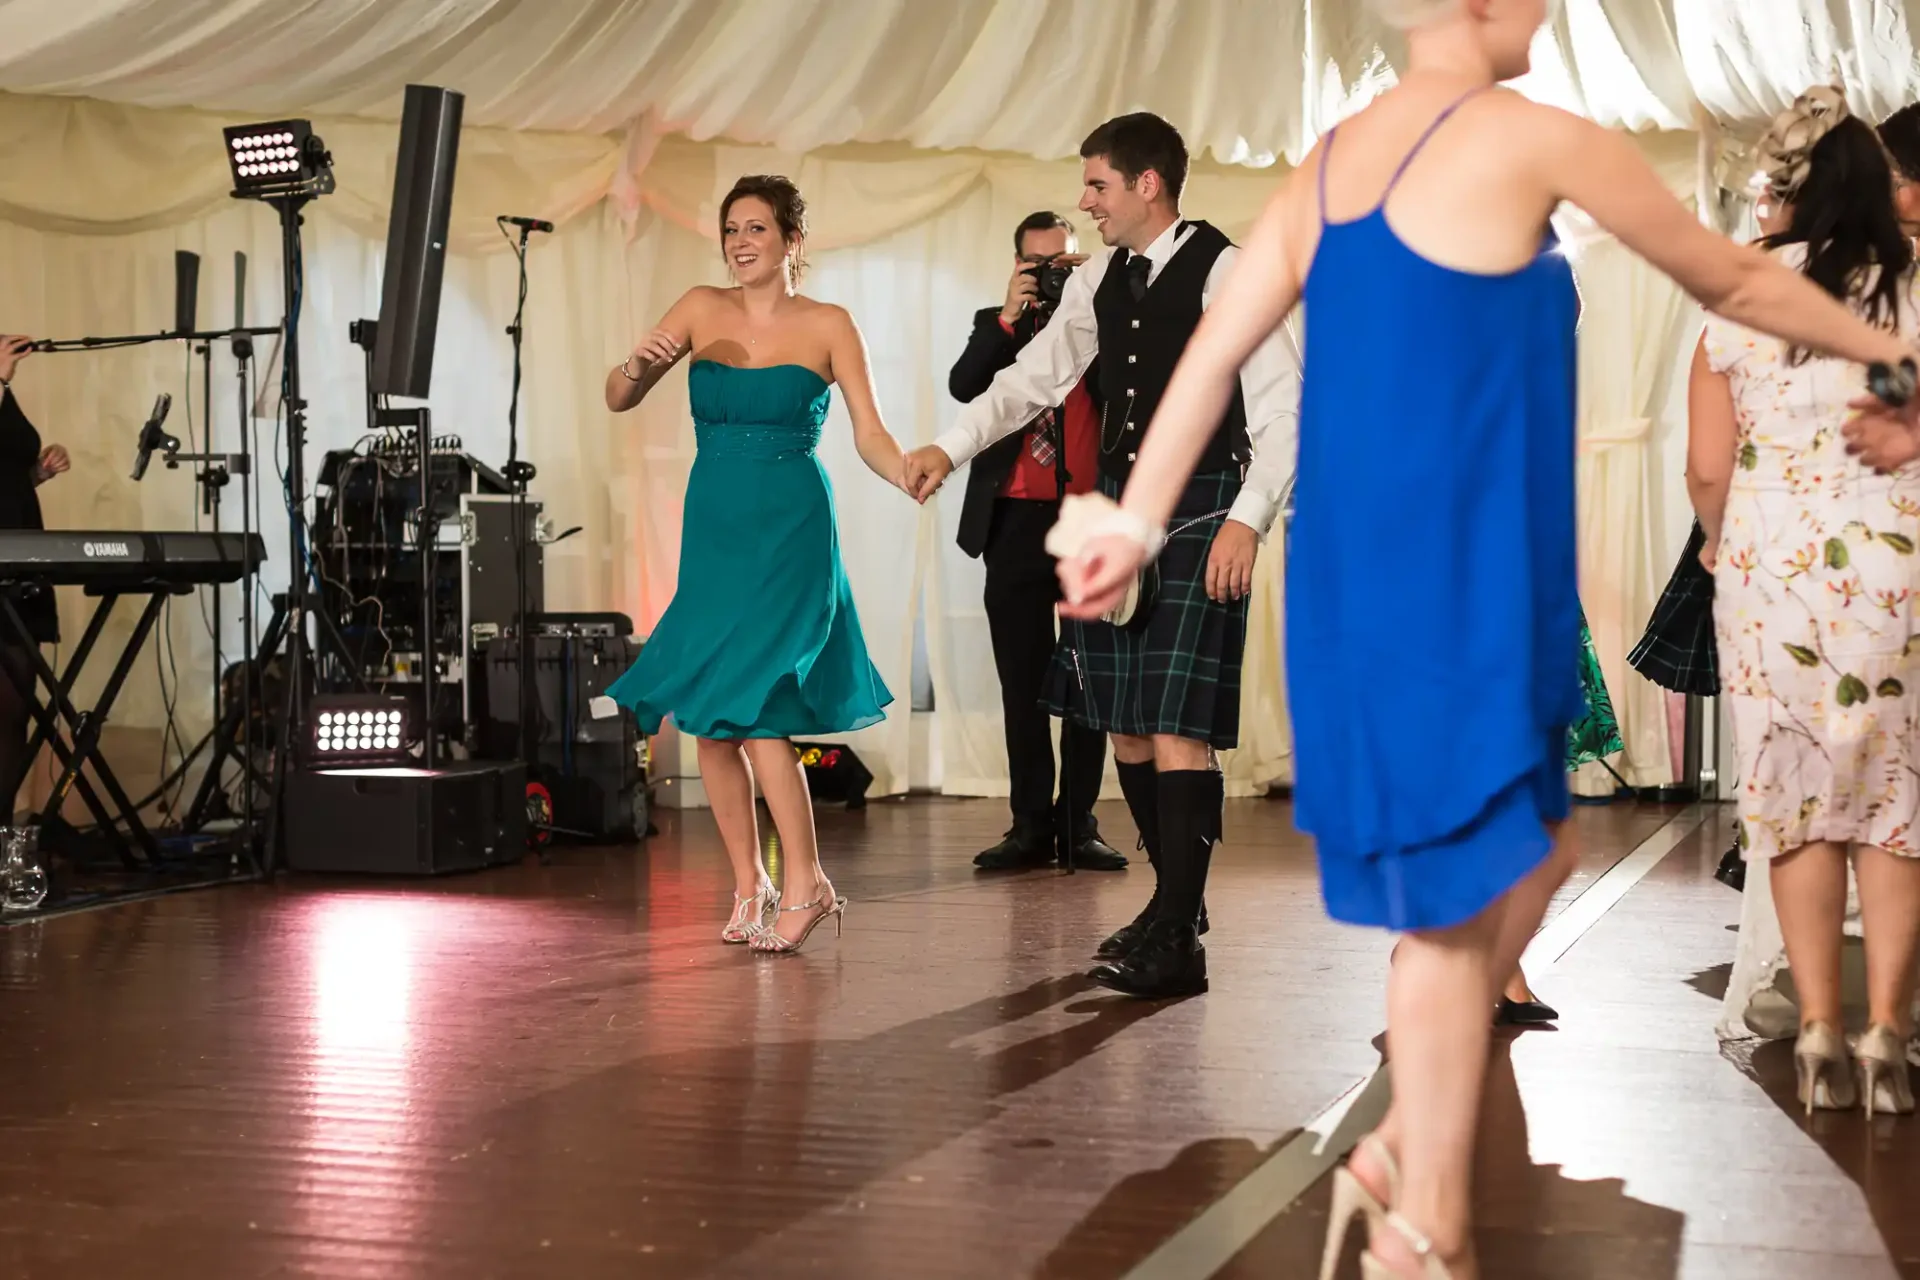 A woman in a teal dress dances with a man in a kilt at a lively wedding reception inside a tent.